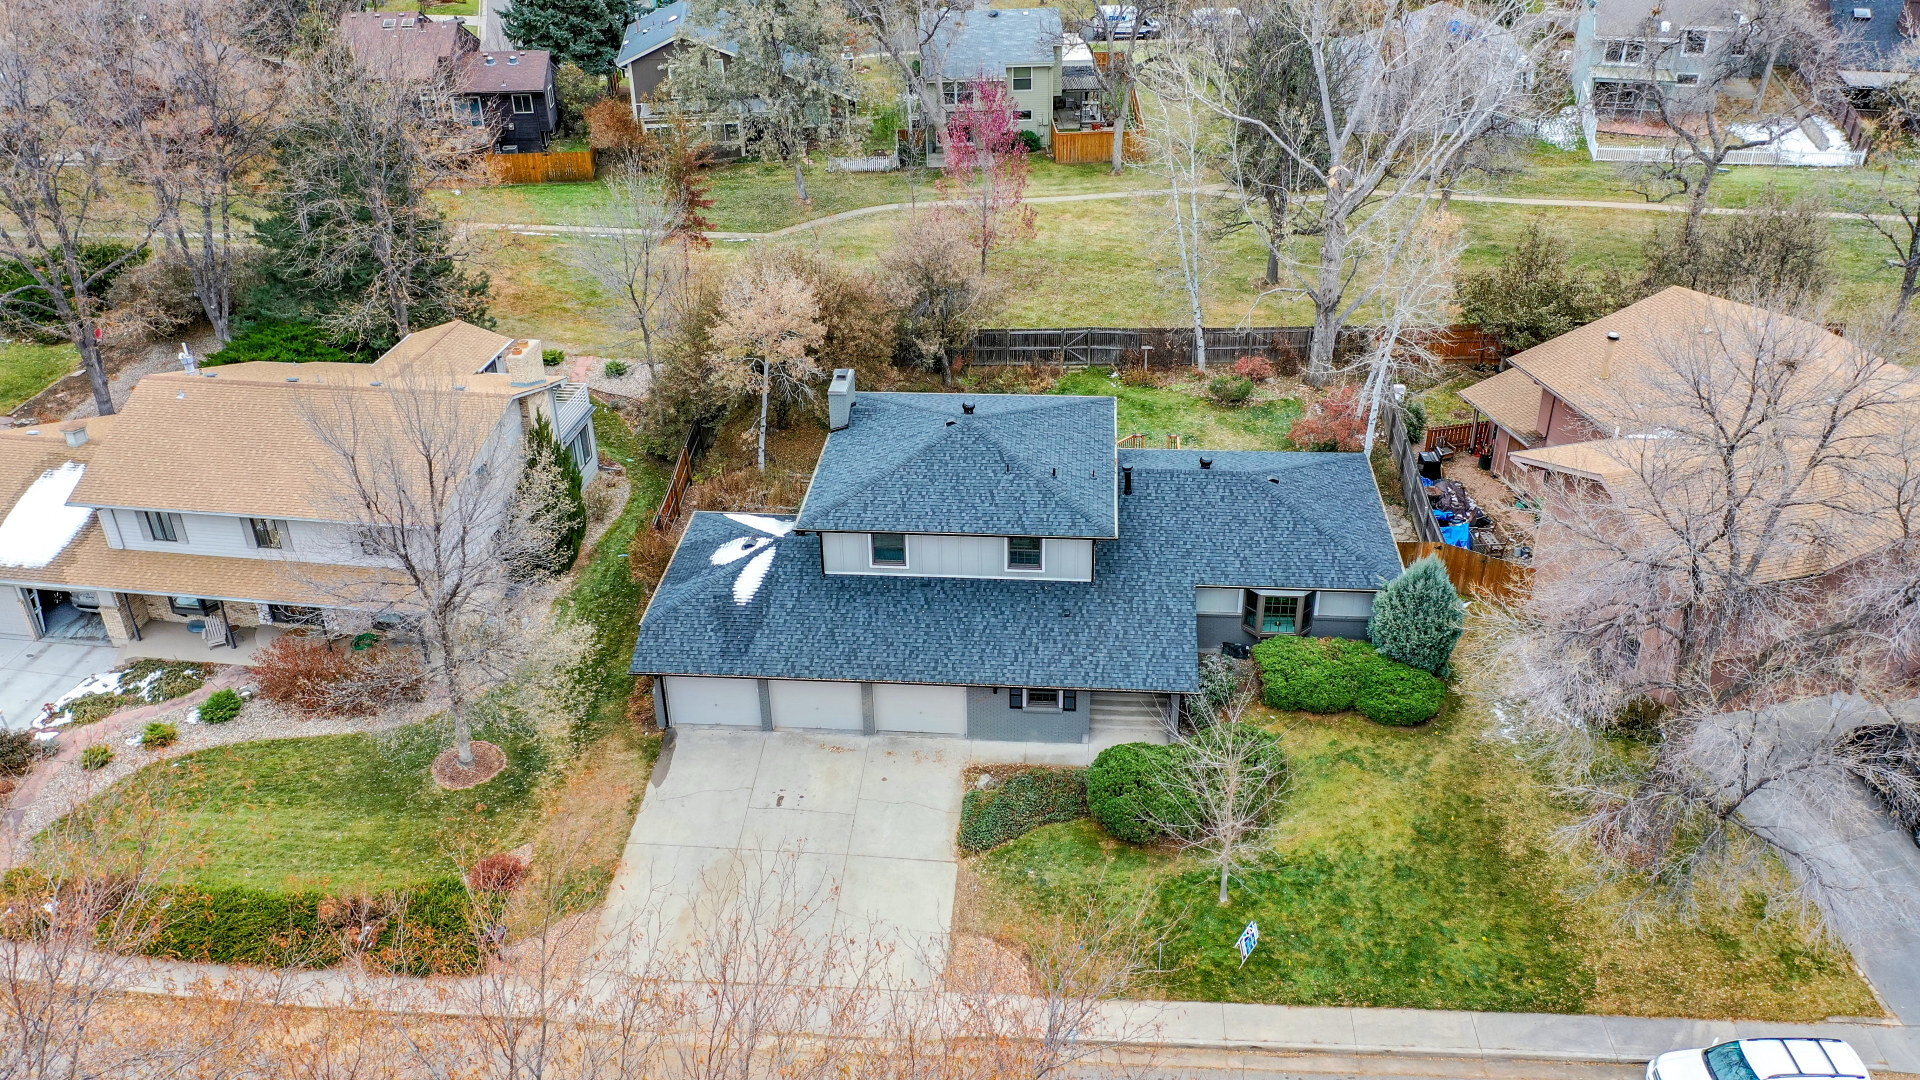 Aerial view of a large home with bay window and three garages